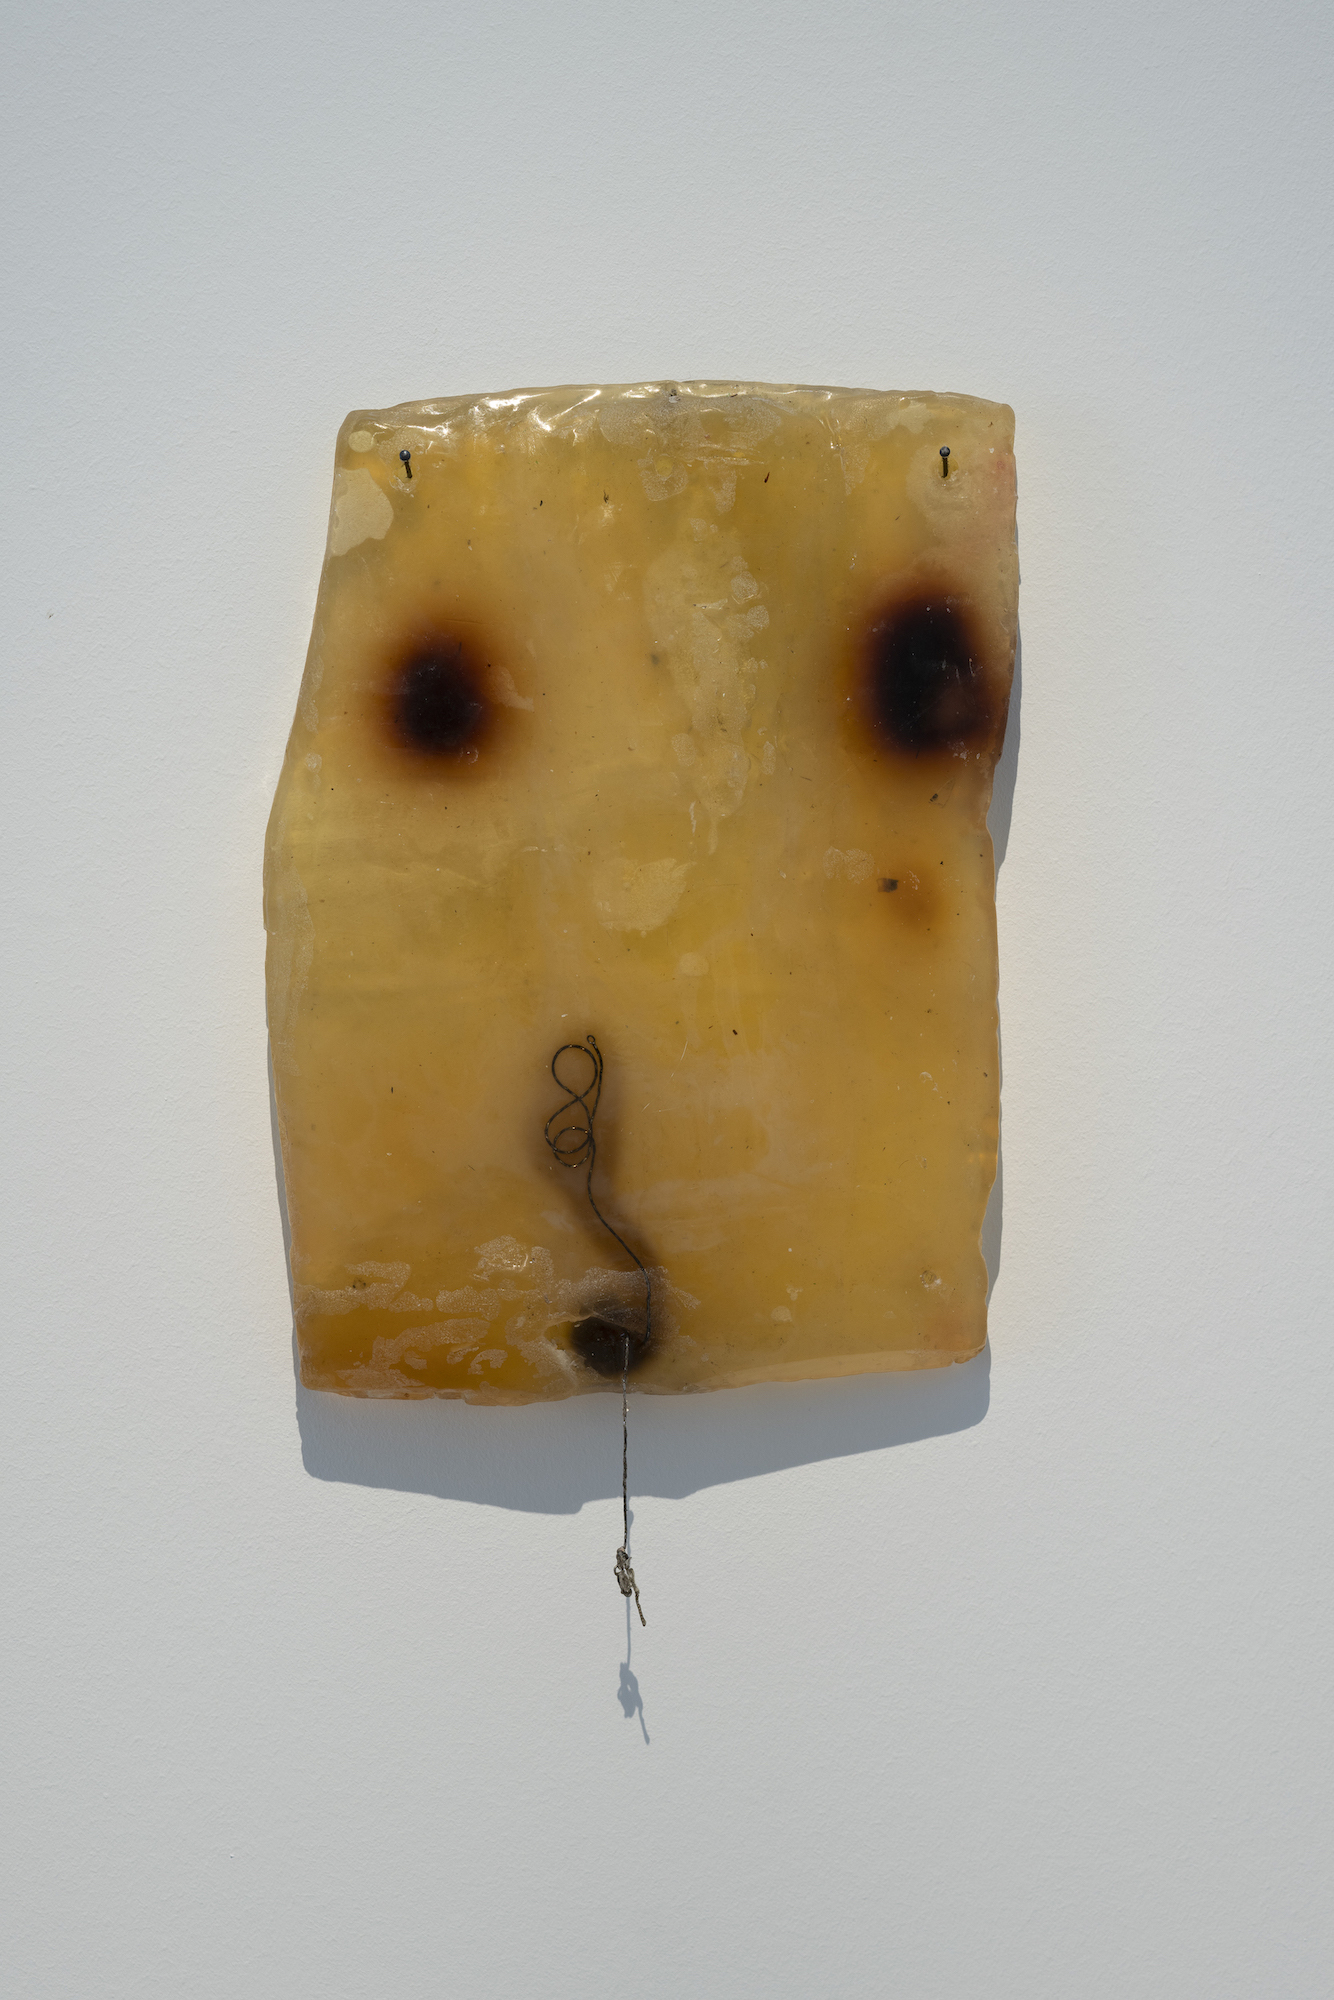 Bri Williams, Torso, 2018, Soap, necklace, resin, 18 x 45 x 34 cm, Courtesy of Queer Thoughts, New York